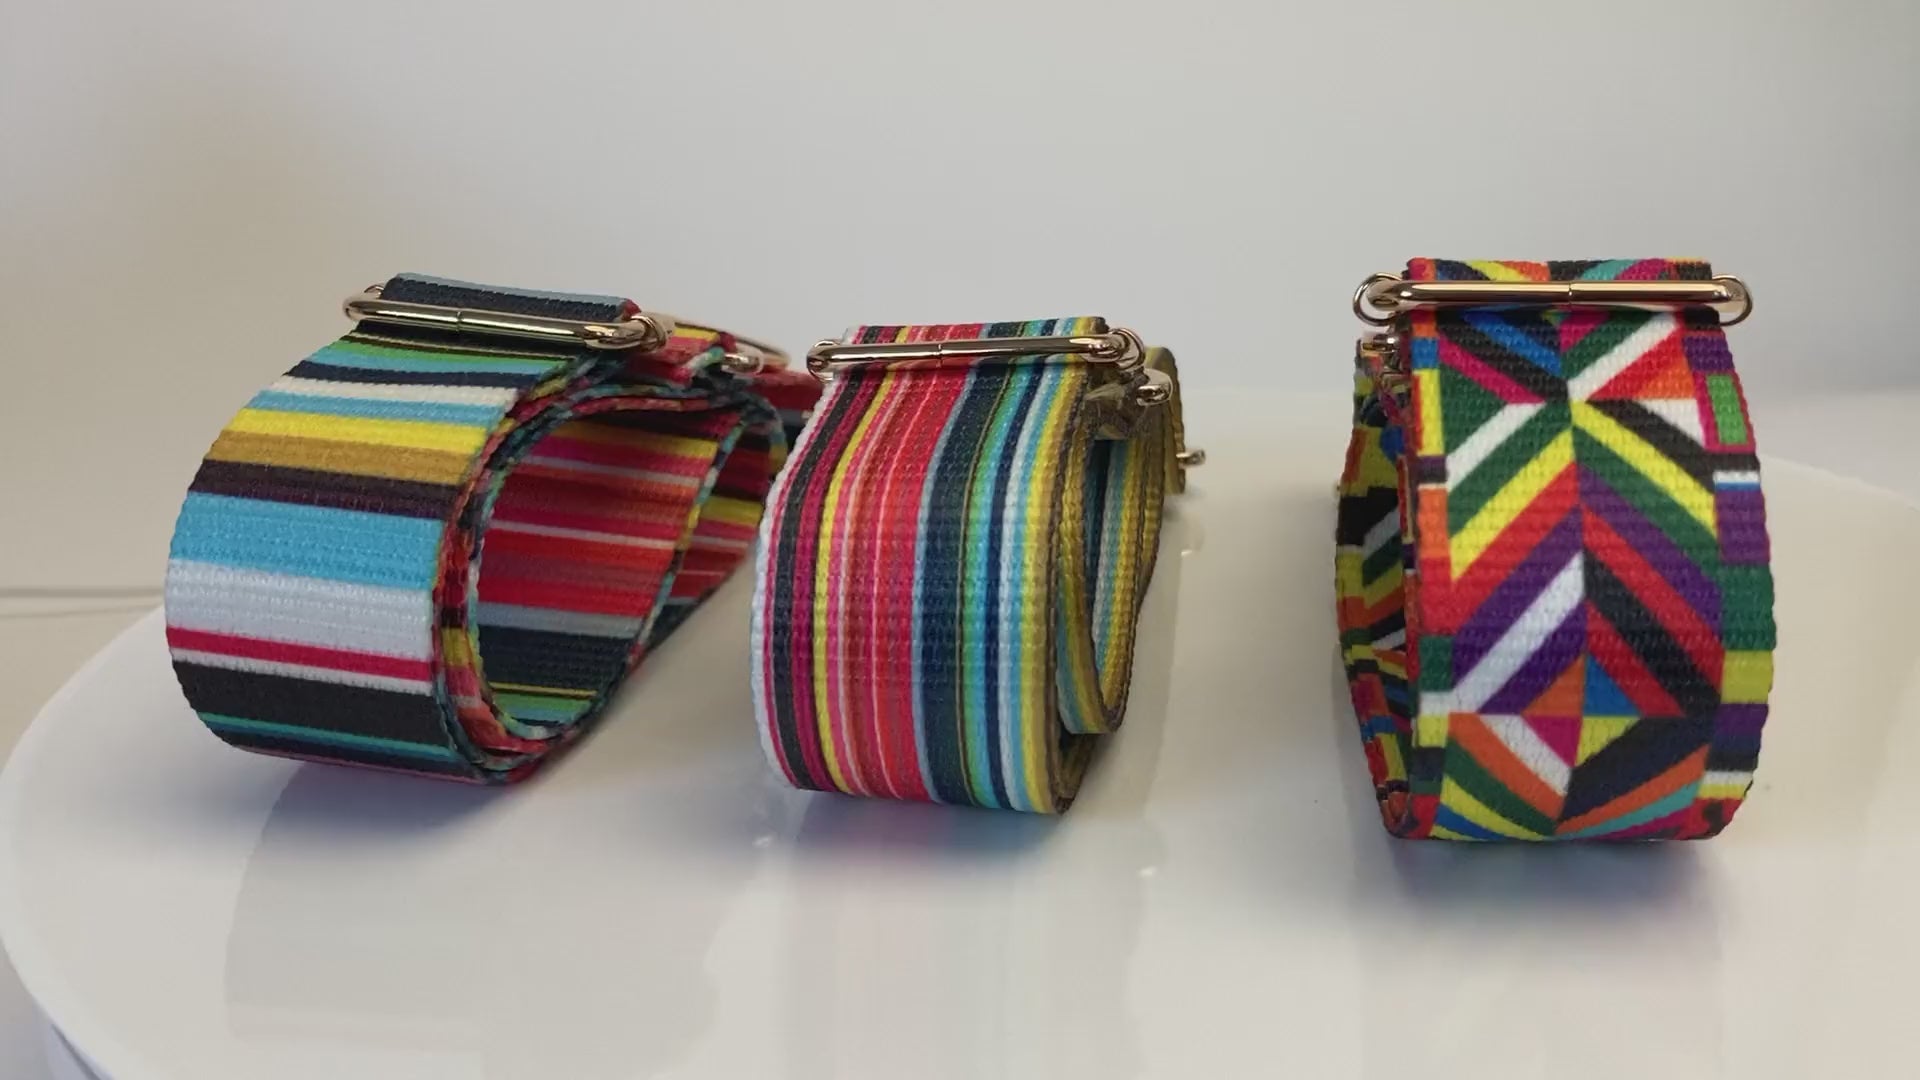 Video of 3 colorful purse straps in a row